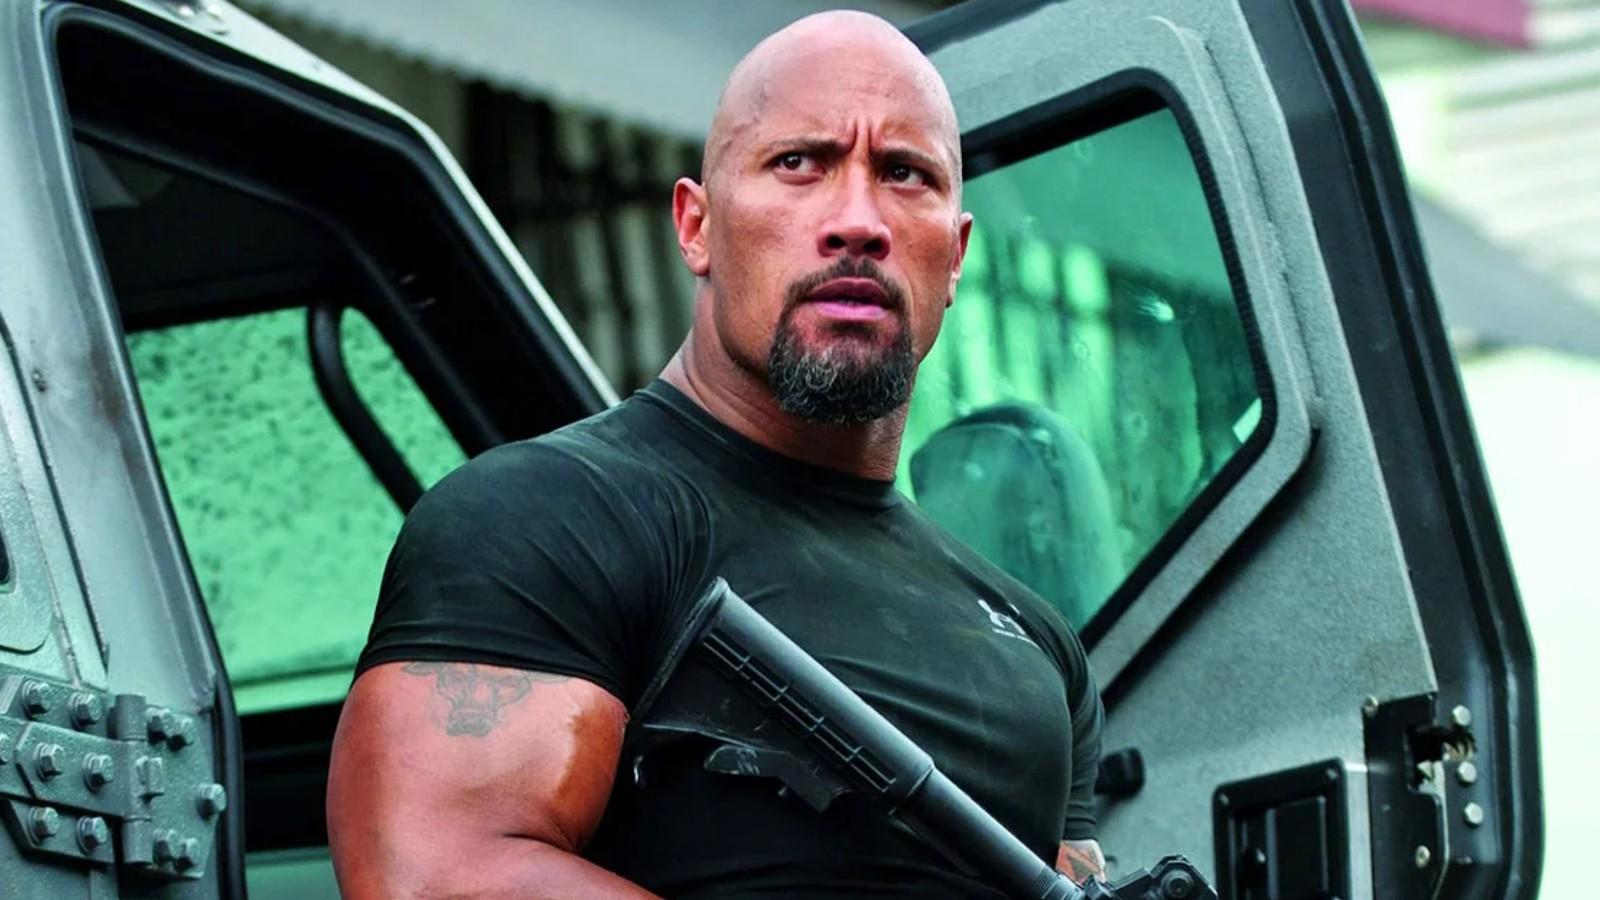 Dwayne 'The Rock' Johnson as Luke Hobbs in the Fast and Furious franchise